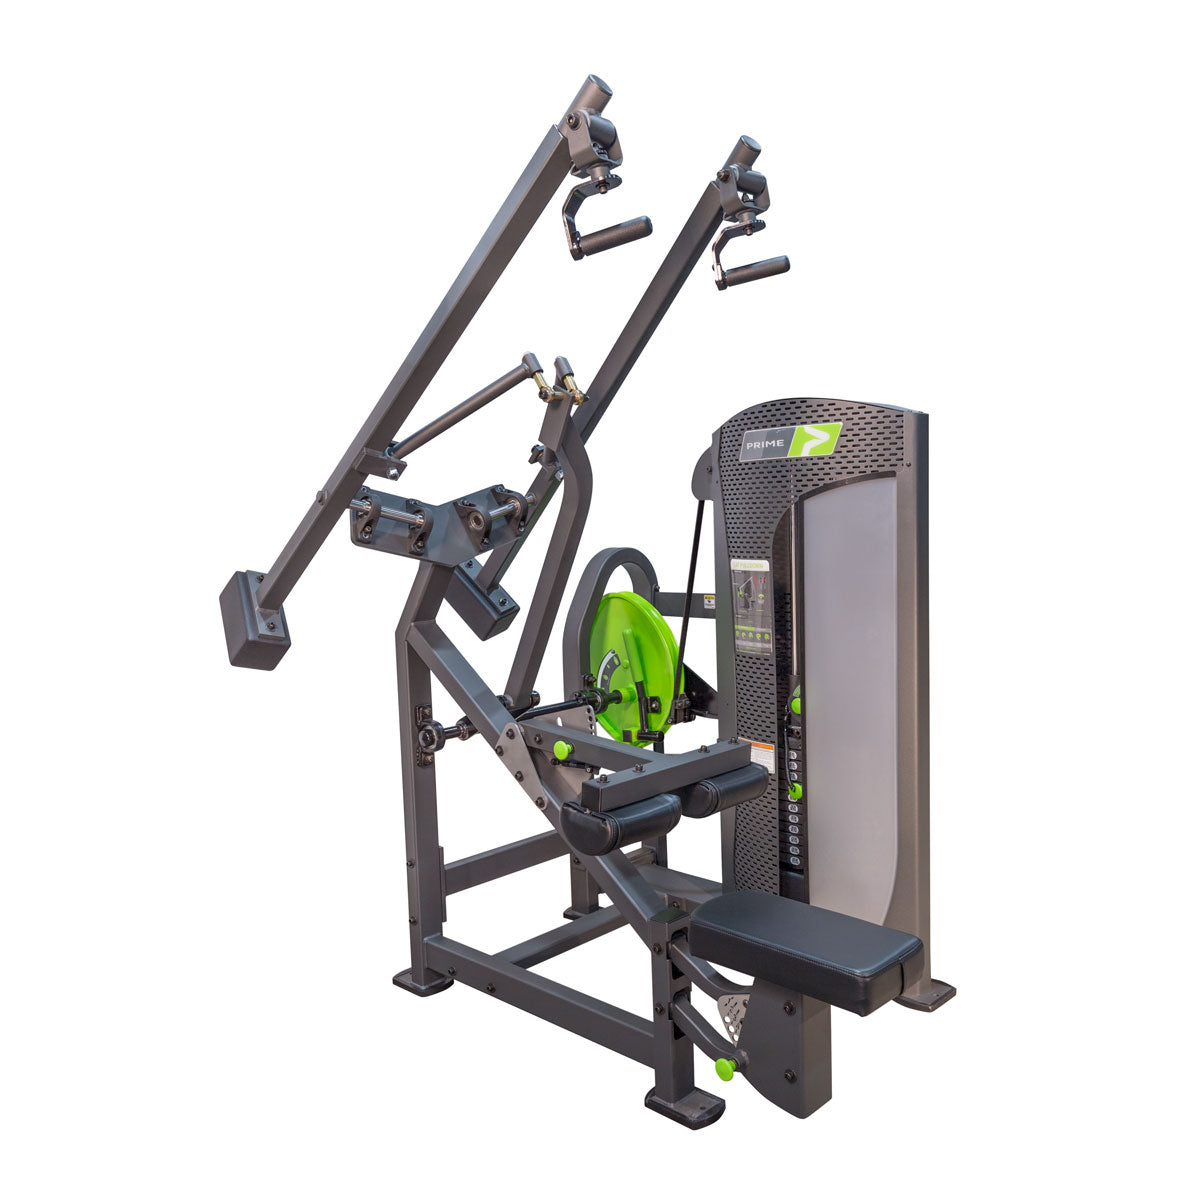 Prime Plate Loaded Incline Press - Overview 